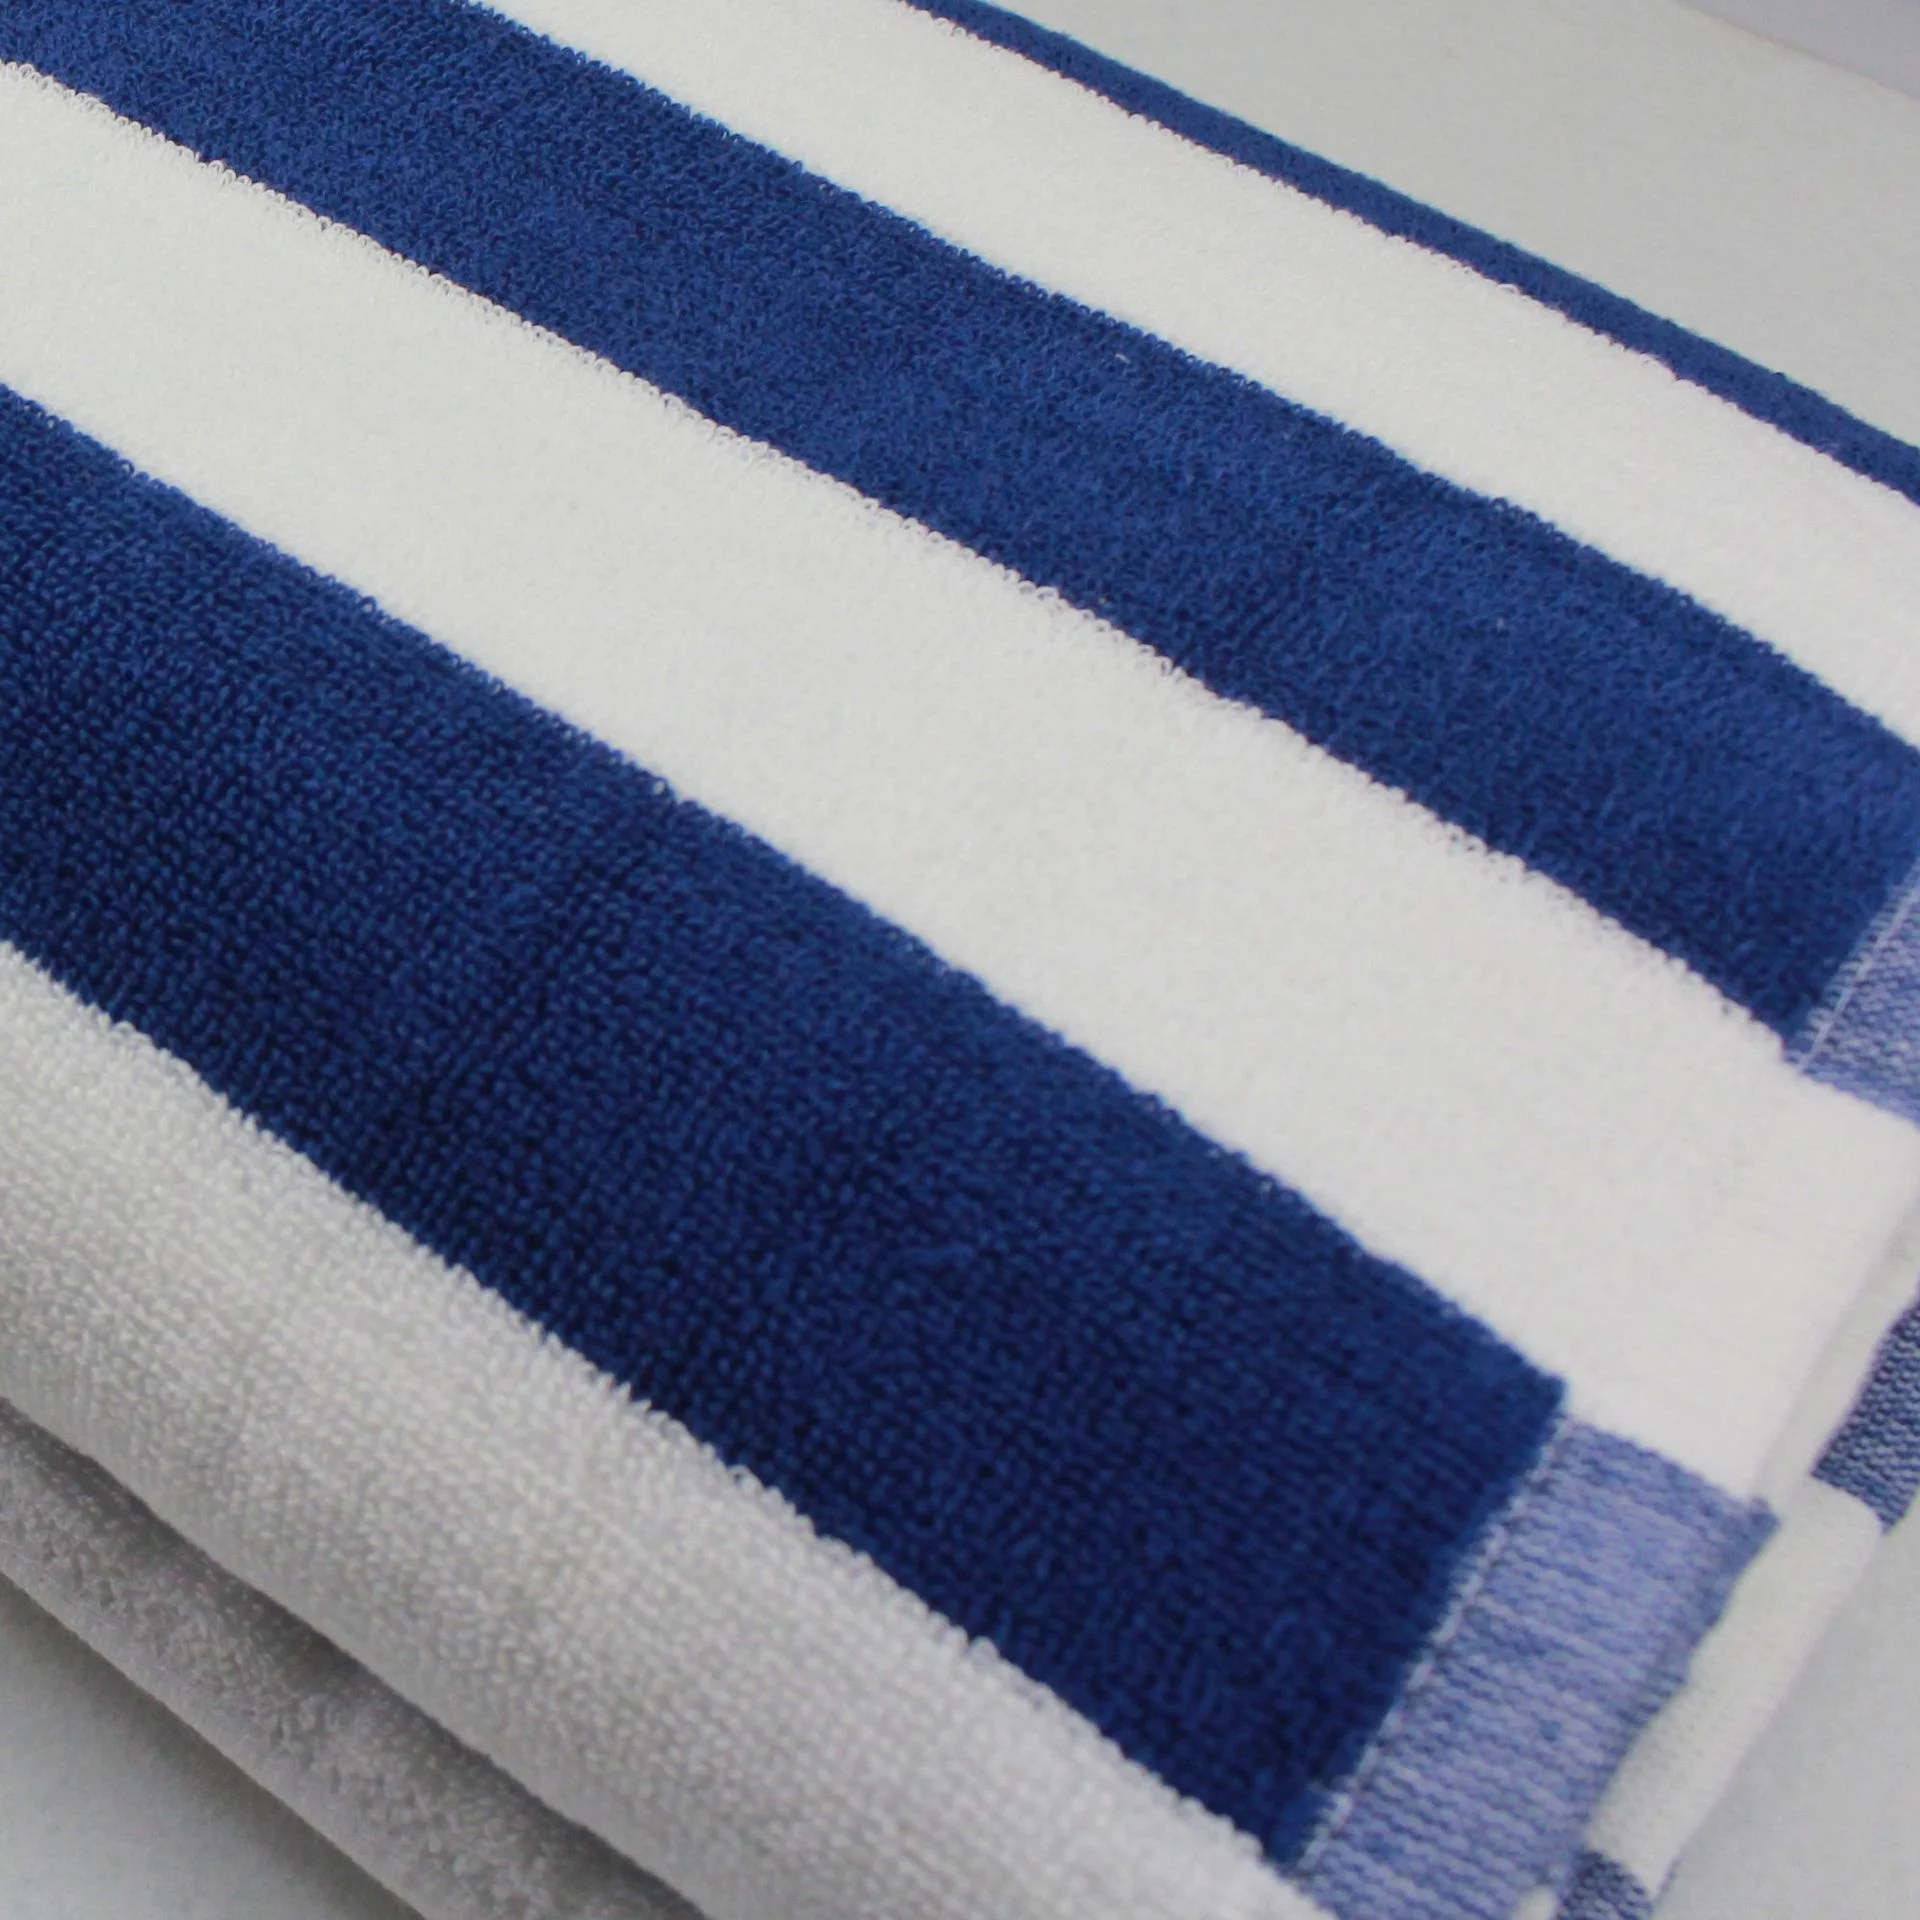 Cotton Luxury Blue And White Striped Pool Towel Beach Towel - Buy ...